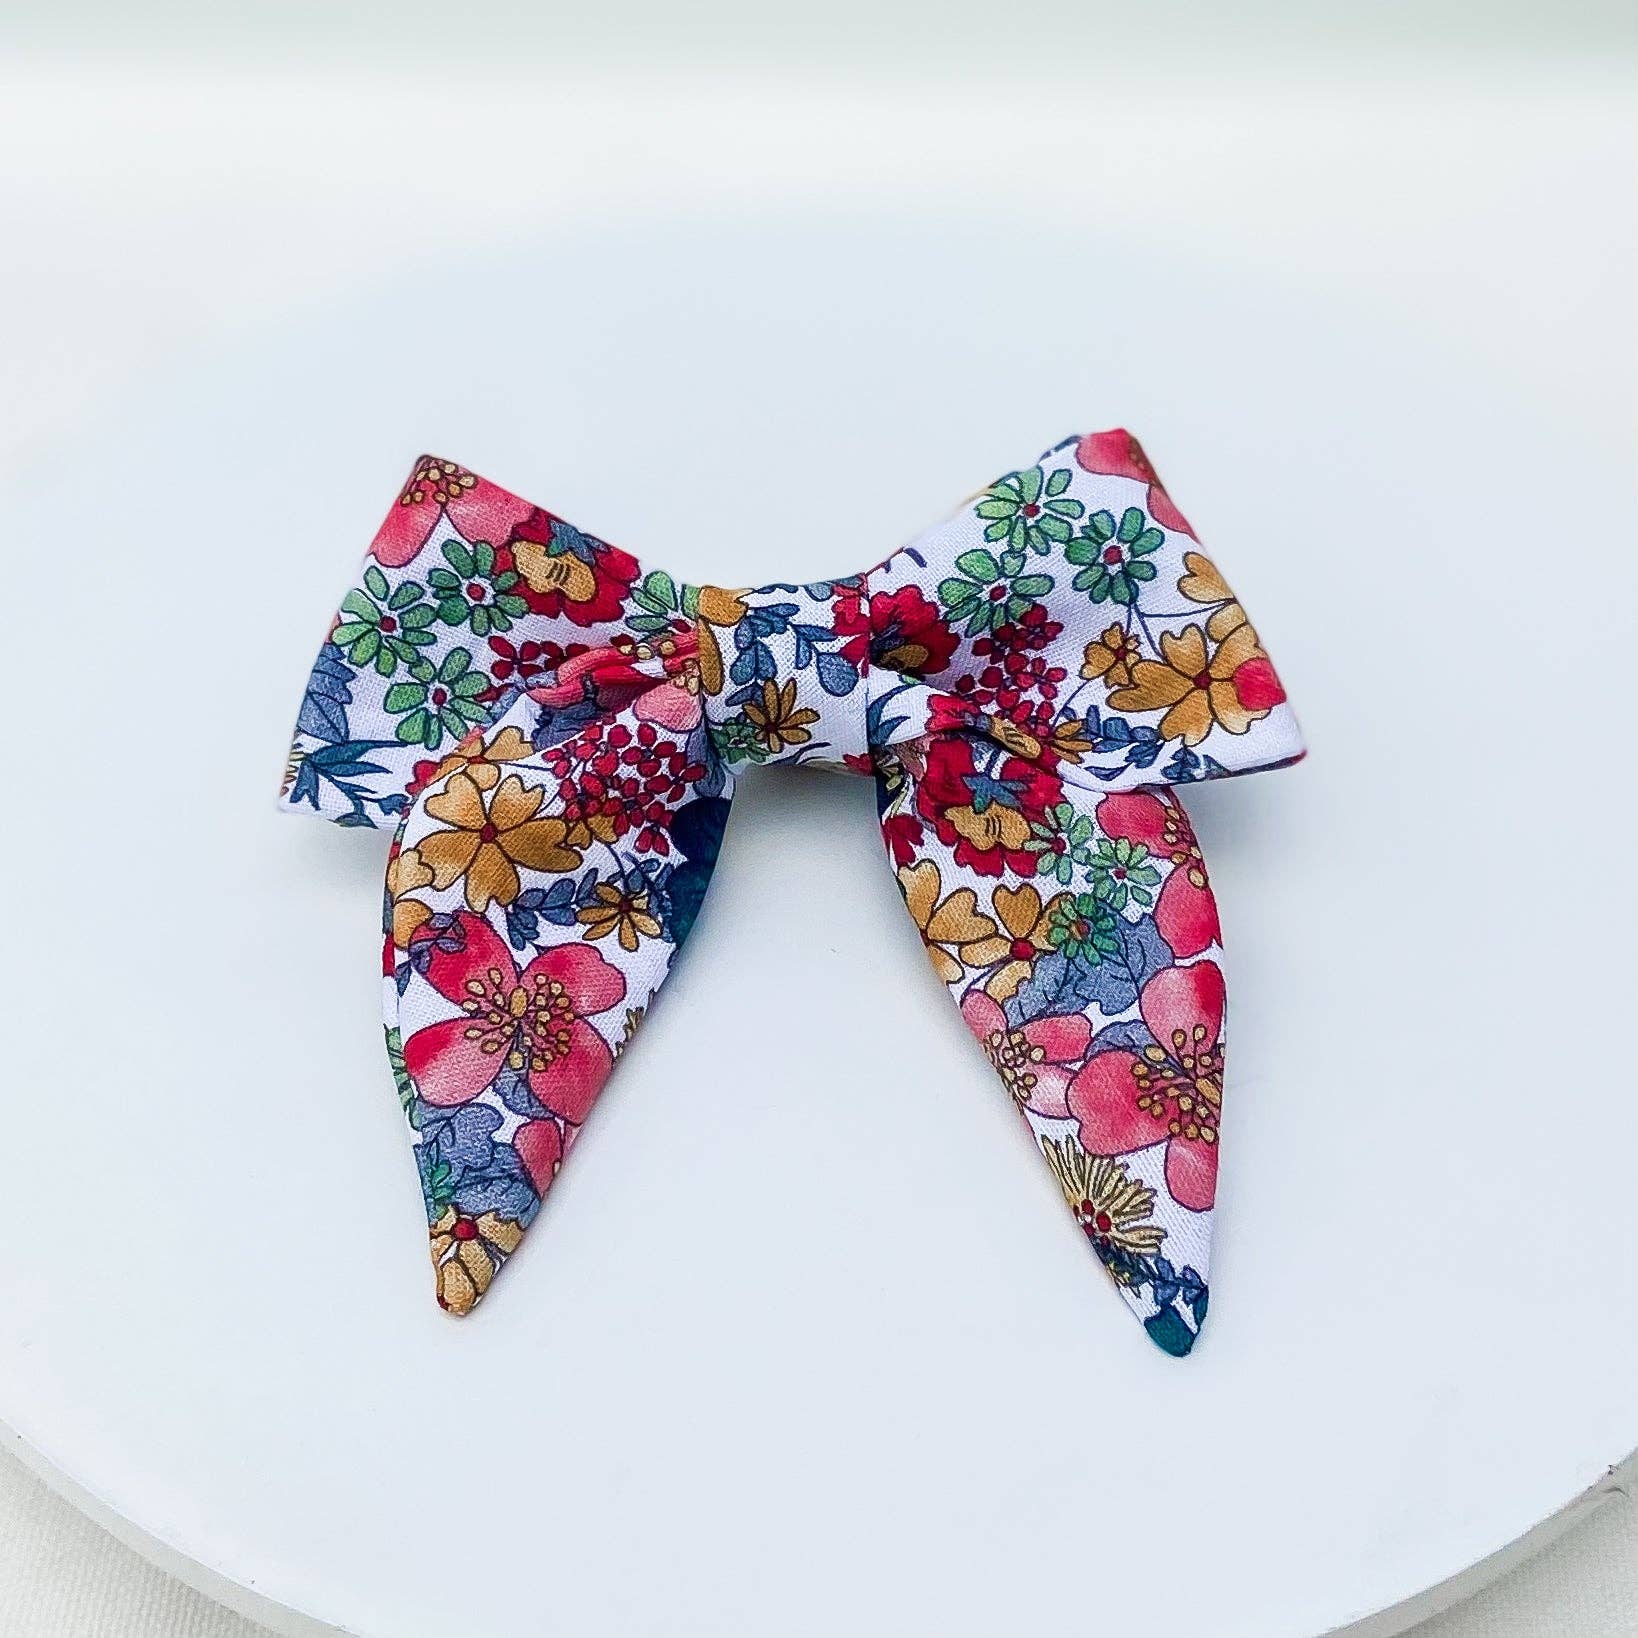 doggish - Vintage inspired floral sailor dog bow tie pet accessory